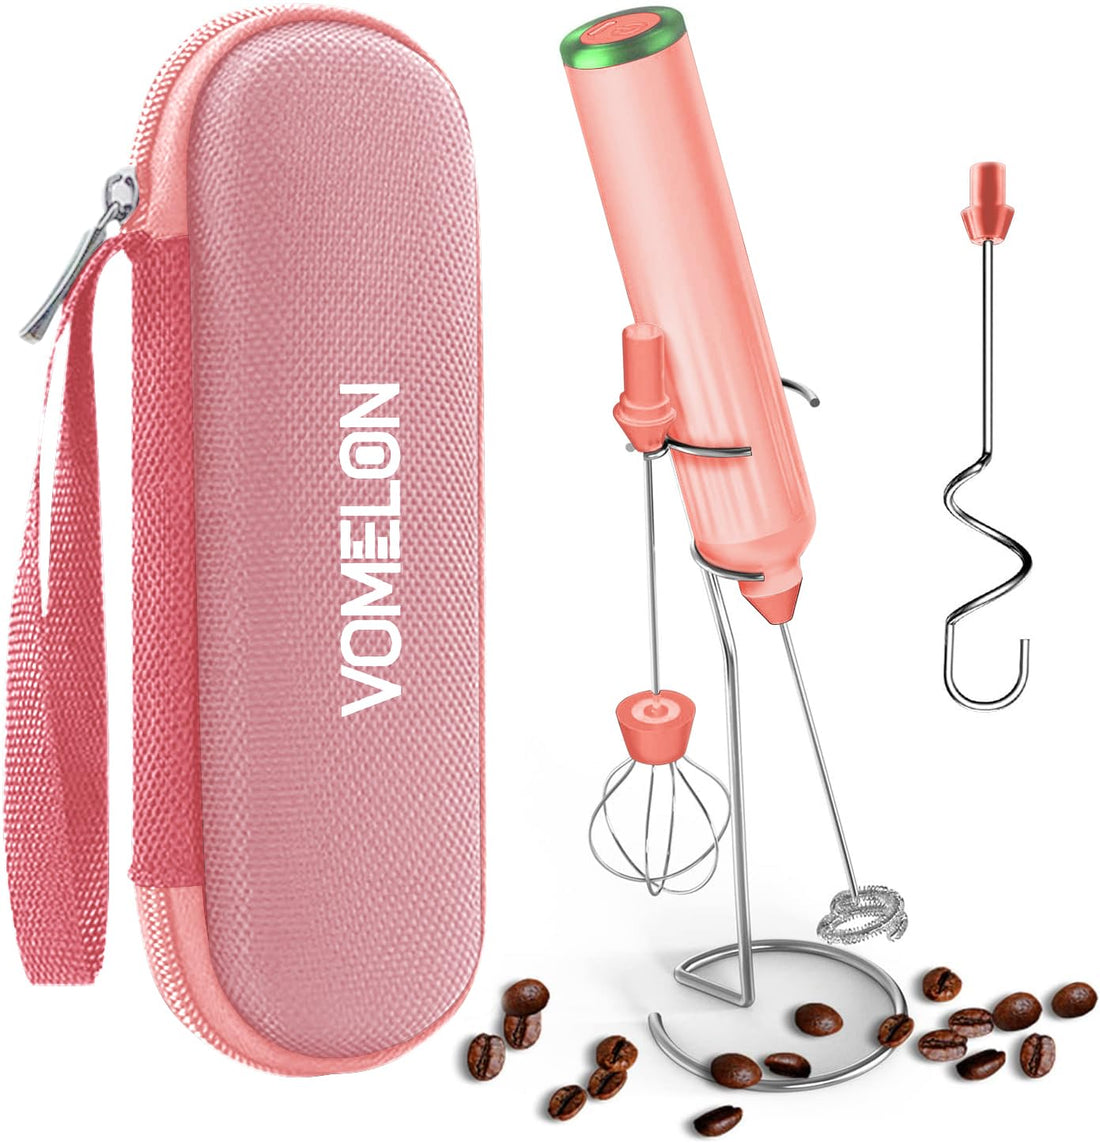 Milk Frother Handheld with 3 Stainless Steel Whisks, Rechargeable Electric Drink Mixer with Stand & Travel Case, Milk Foamer for Coffee, Latte, Cappuccino, Hot Chocolate, Egg,Jam Supplement-Pink